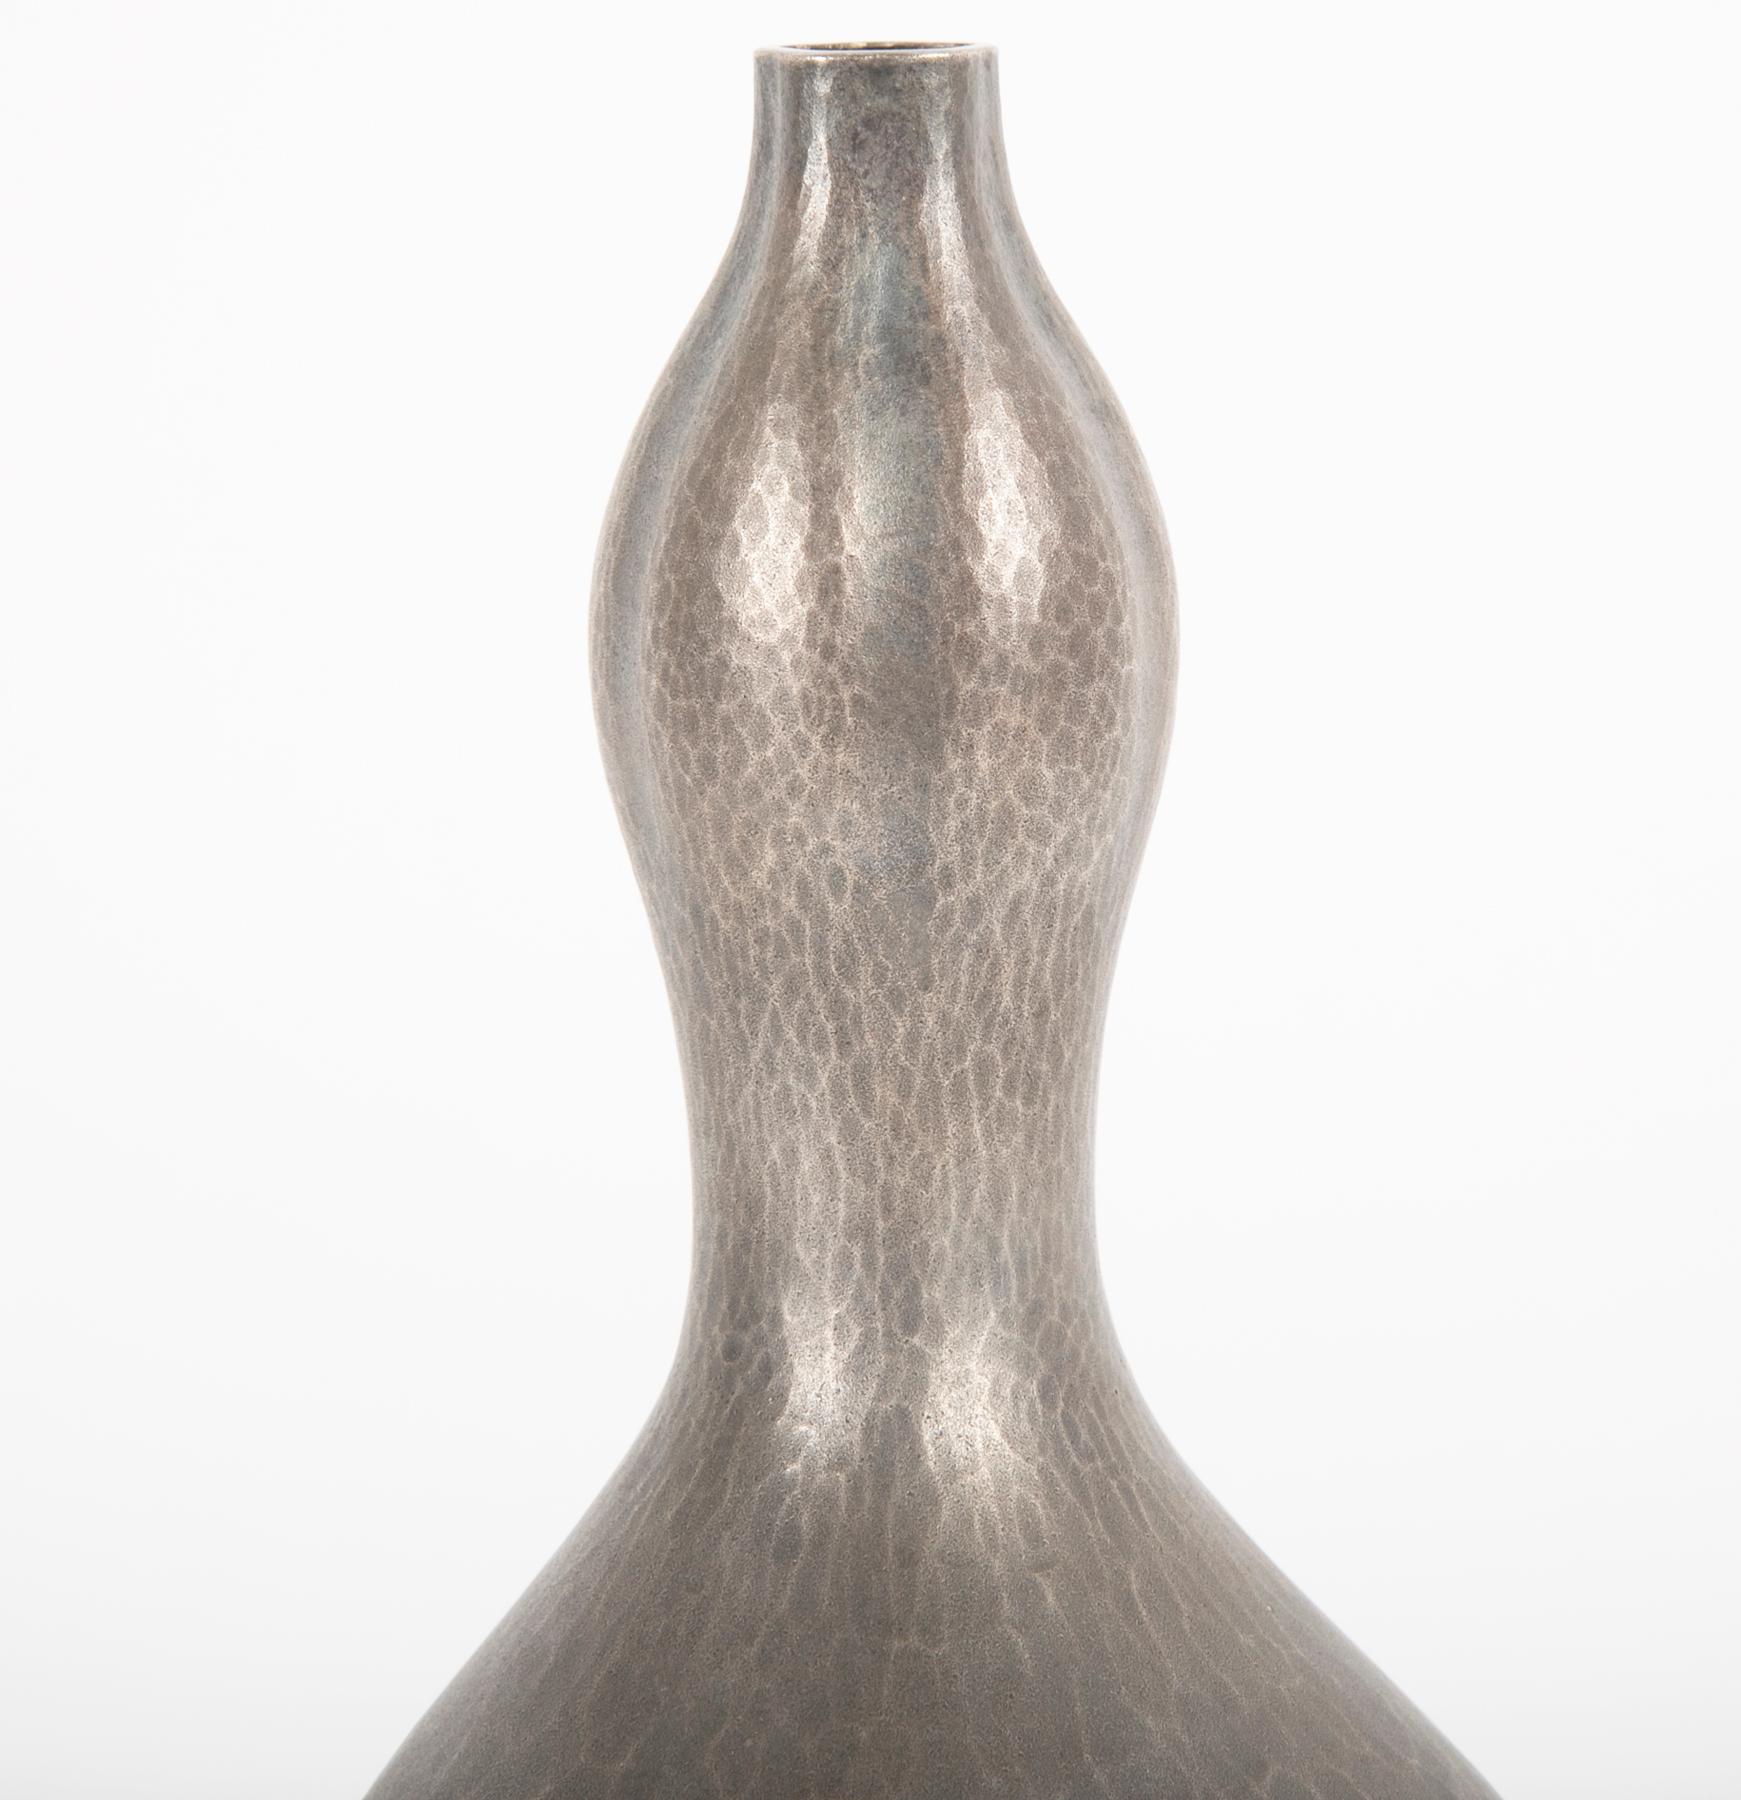 A Japanese silver double gourd vase with a matt, hand-hammered grey and silver patina. Attributed to Hirata Munemichi. Unsigned with wooden storage box. Stamp on base, 